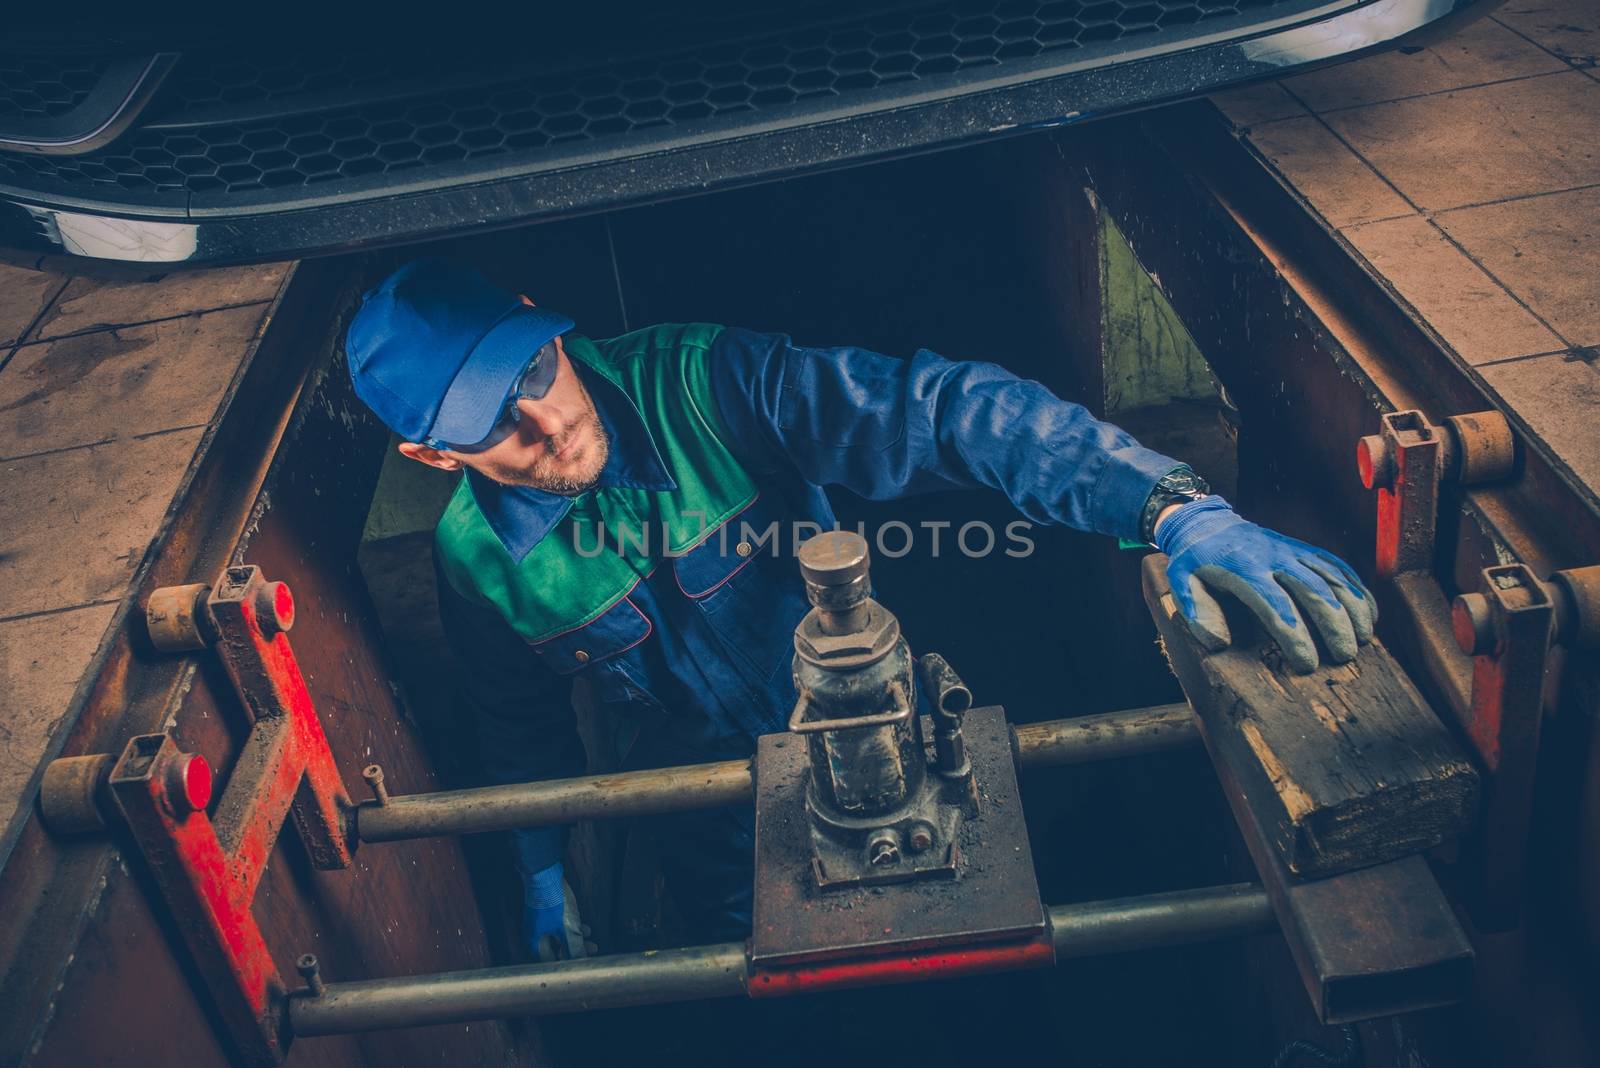 Car Mechanic Working Under the Car To Fix Vehicle Exhaust System. Car Maintenance.